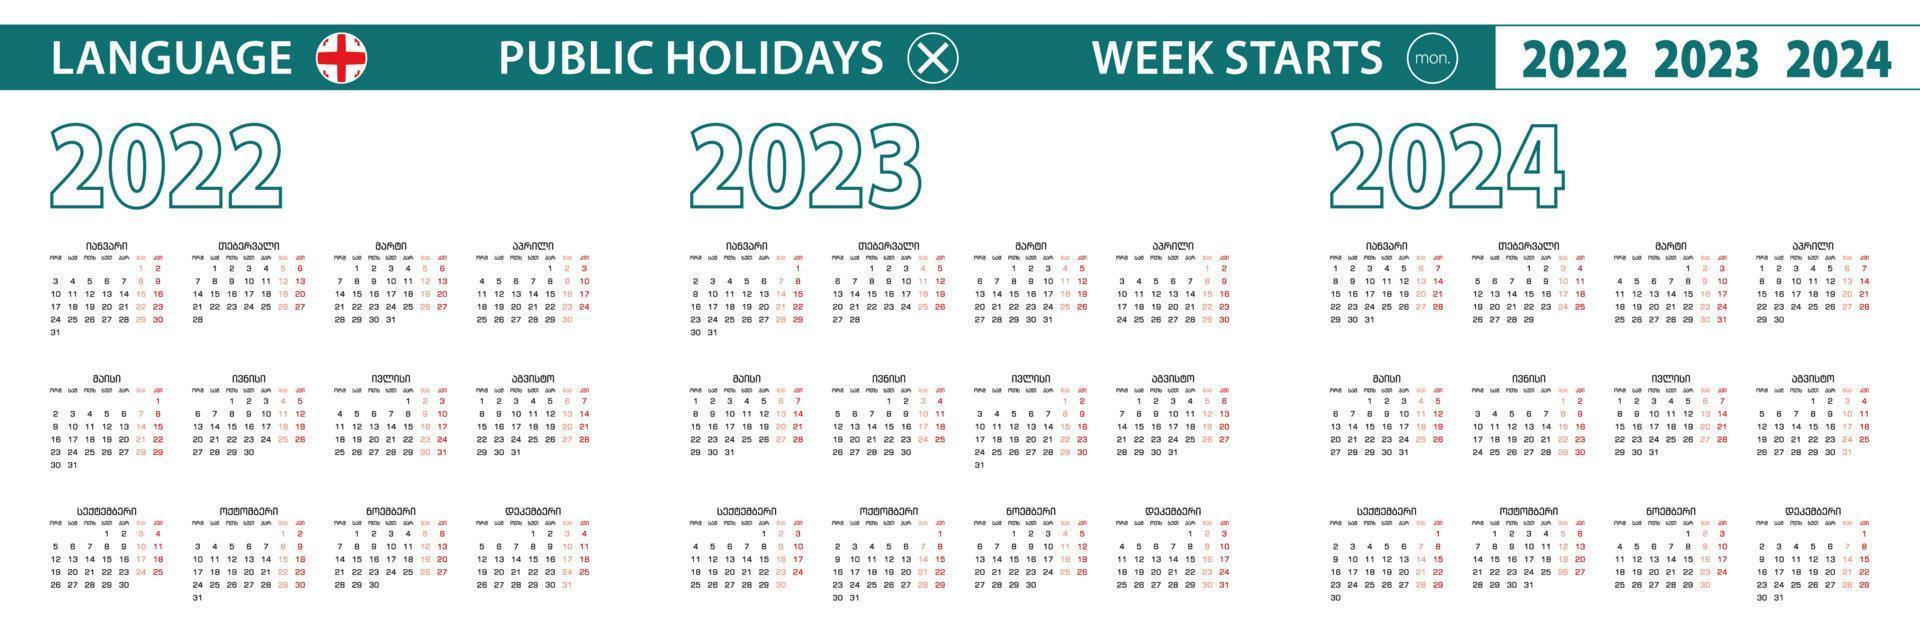 Simple calendar template in Georgian for 2022, 2023, 2024 years. Week starts from Monday. vector